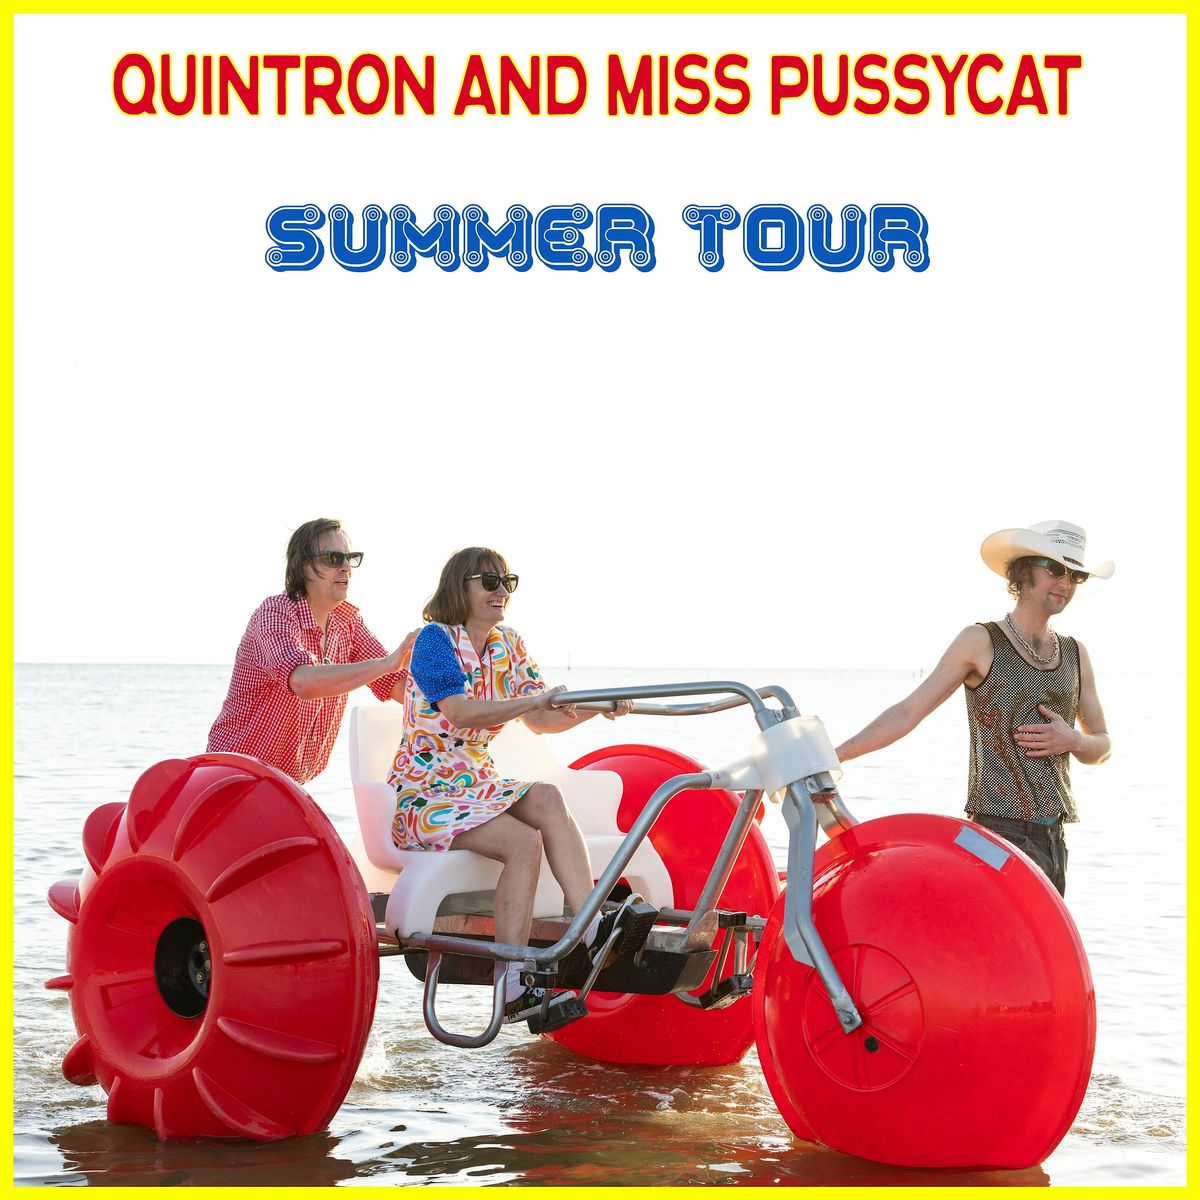 Quintron and Miss Pussycat with Mr. Pacman